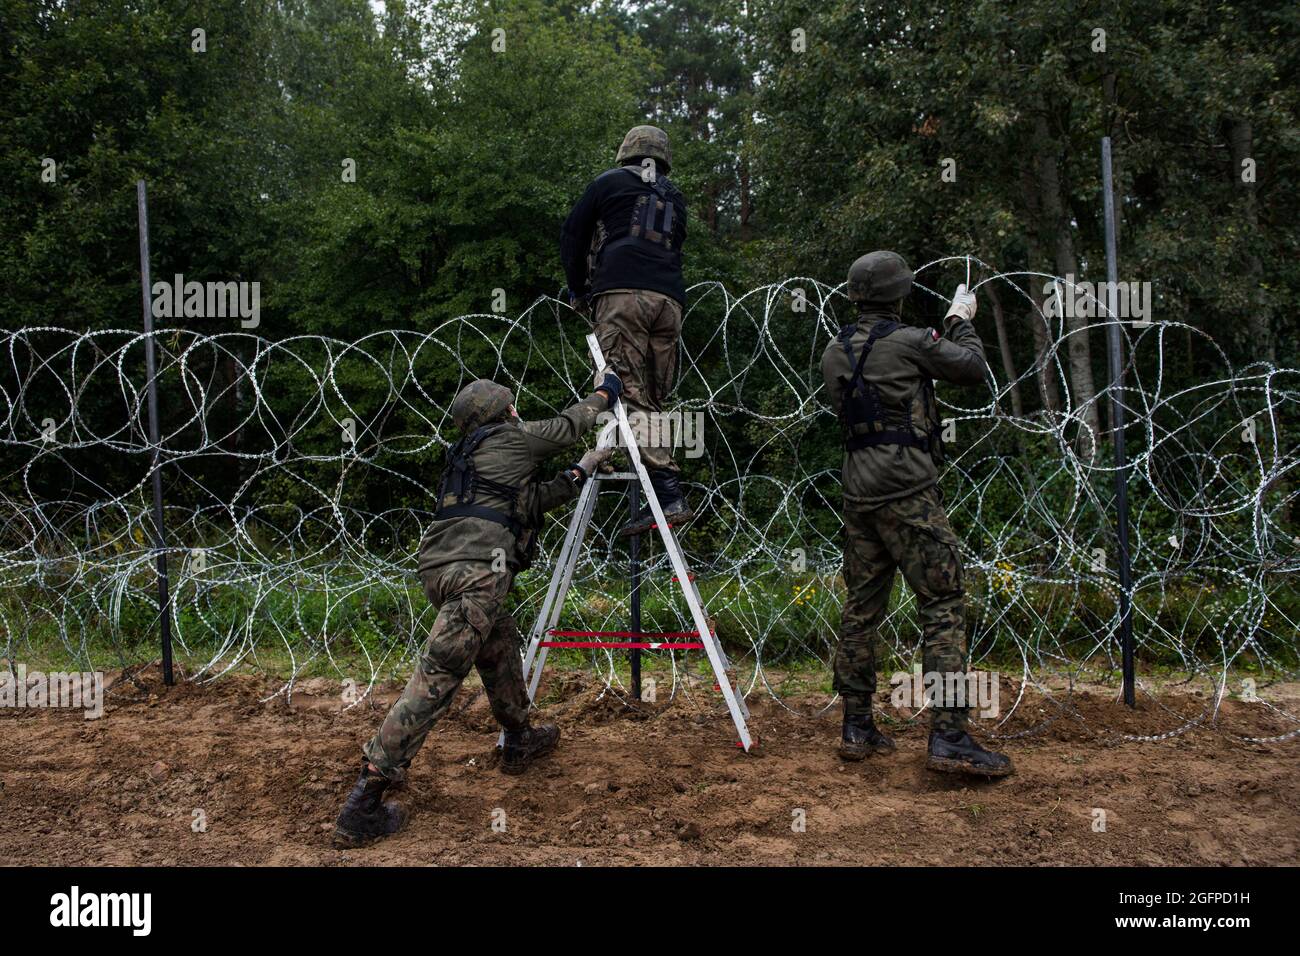 Zubrzyca Wielka, Poland. 26th Aug, 2021. Polish soldiers are seen building a fence along the border with Belarus.Polish army is building a 2.5 meters high barbed wire fence along its border and EU border at the same time with Belarus to stop the recent surge in illegal crossings, mainly by people from Iraq and Afghanistan. Warsaw and Brussels have accused Minsk of deliberately facilitating the passage of migrants into the European Union. Credit: SOPA Images Limited/Alamy Live News Stock Photo